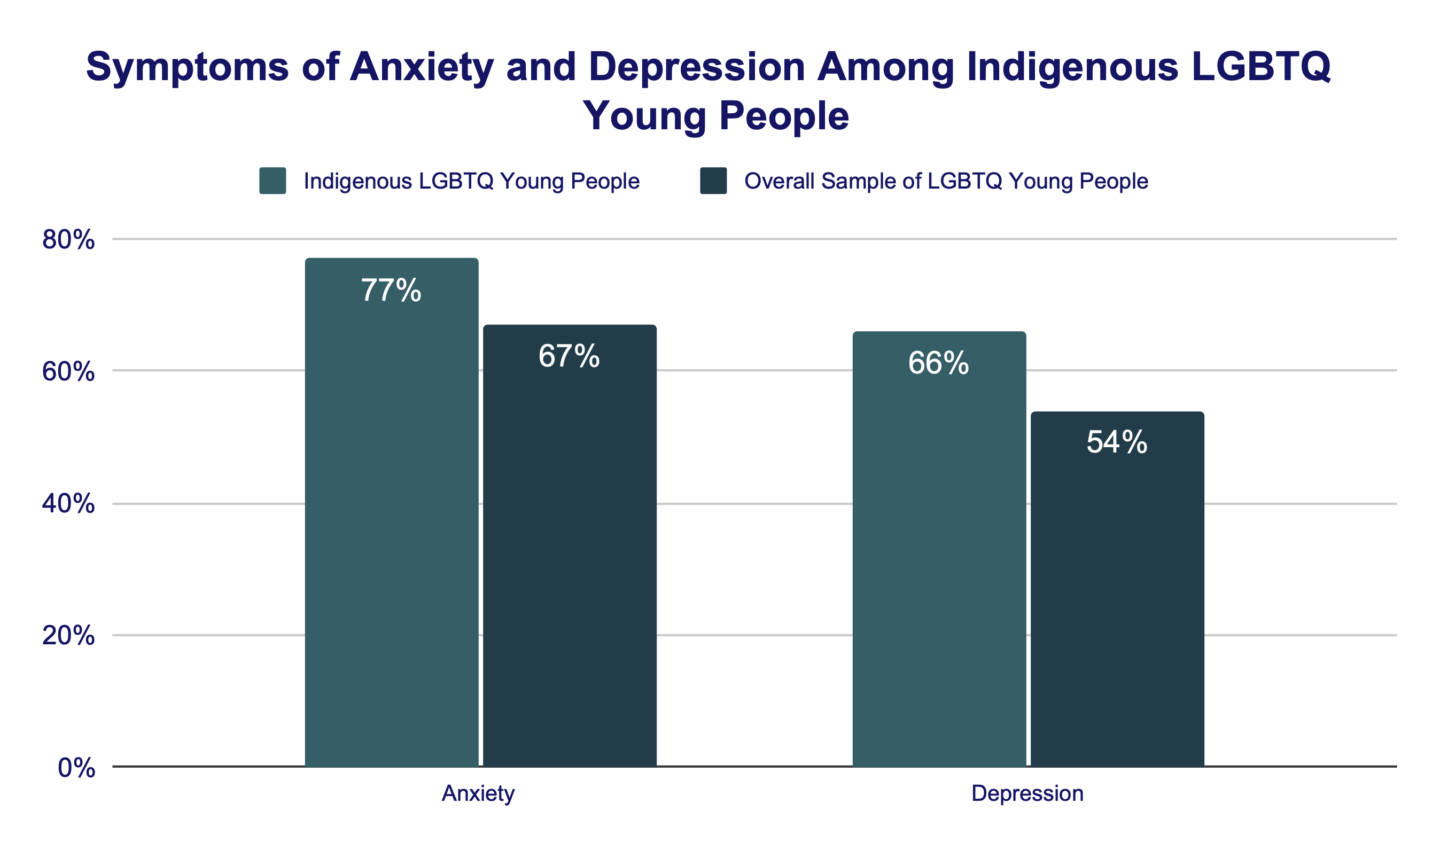 Symptoms of Anxiety and Depression Among Indigenous LGBTQ Young People